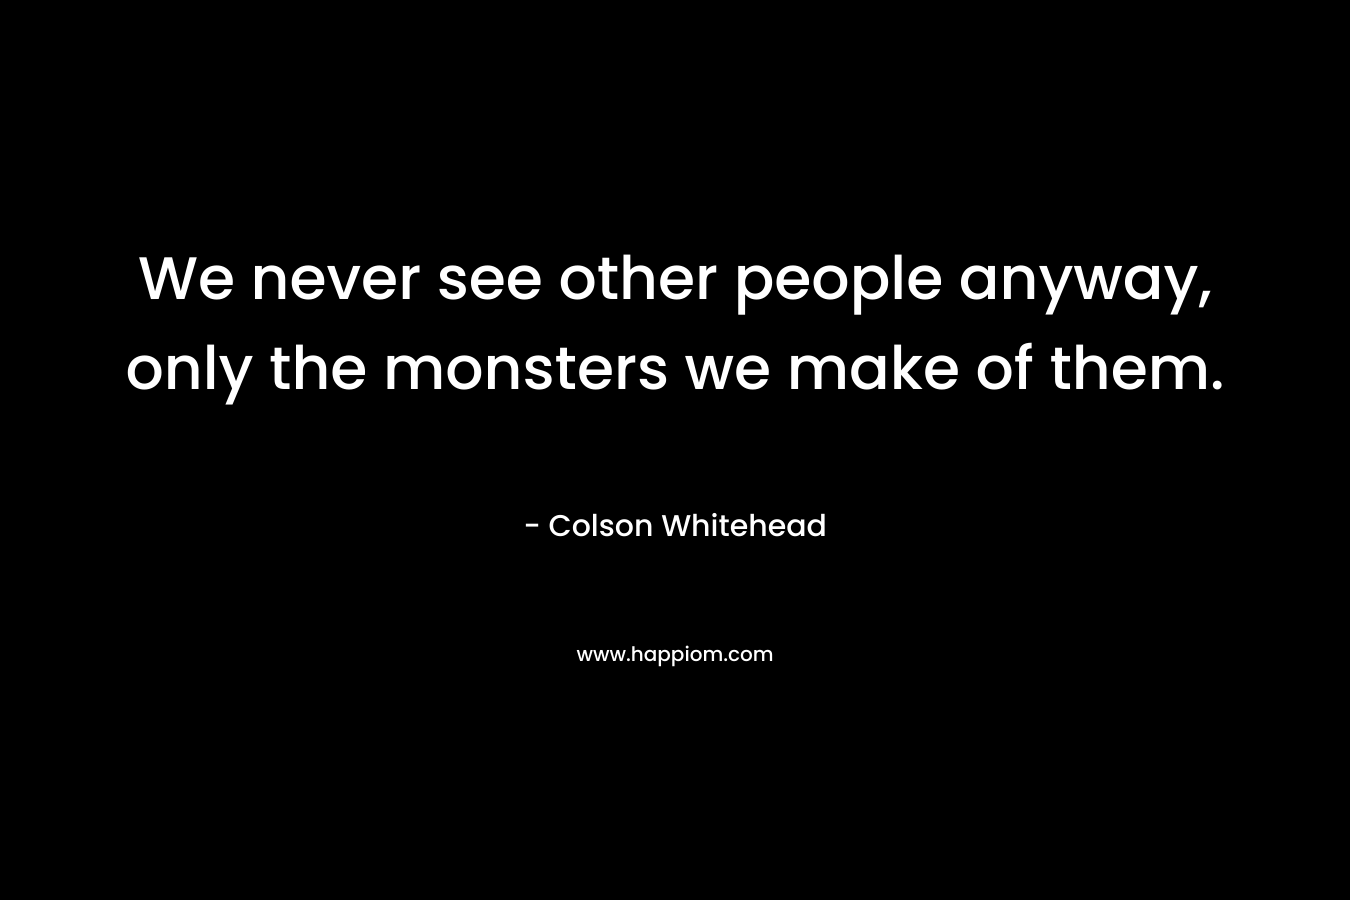 We never see other people anyway, only the monsters we make of them.